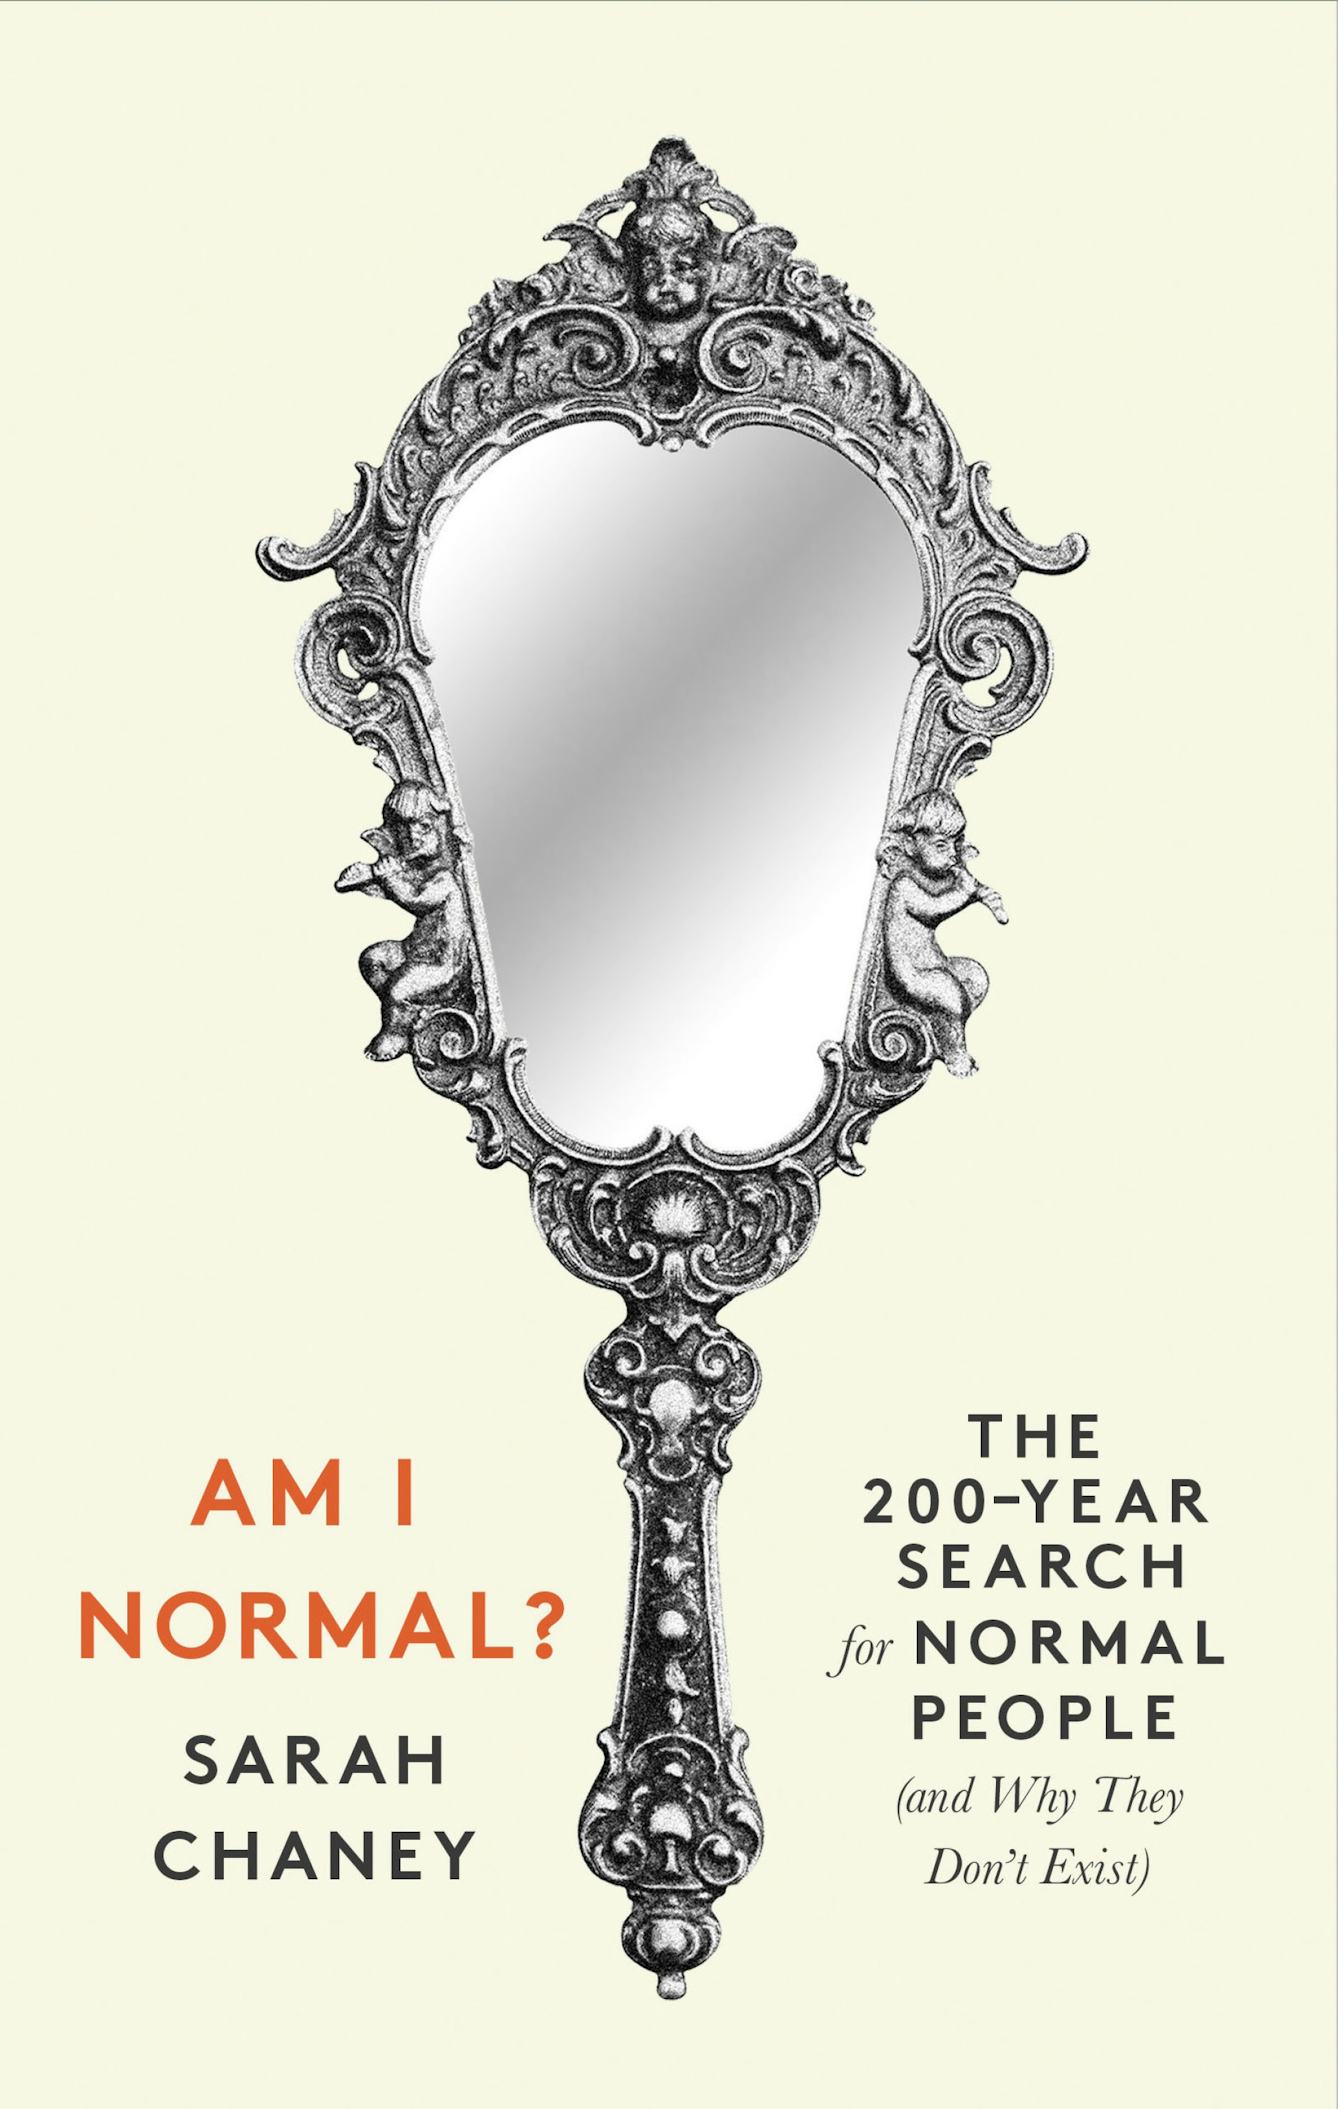 The front cover of the book 'Am I Normal?' by Sarah Chaney